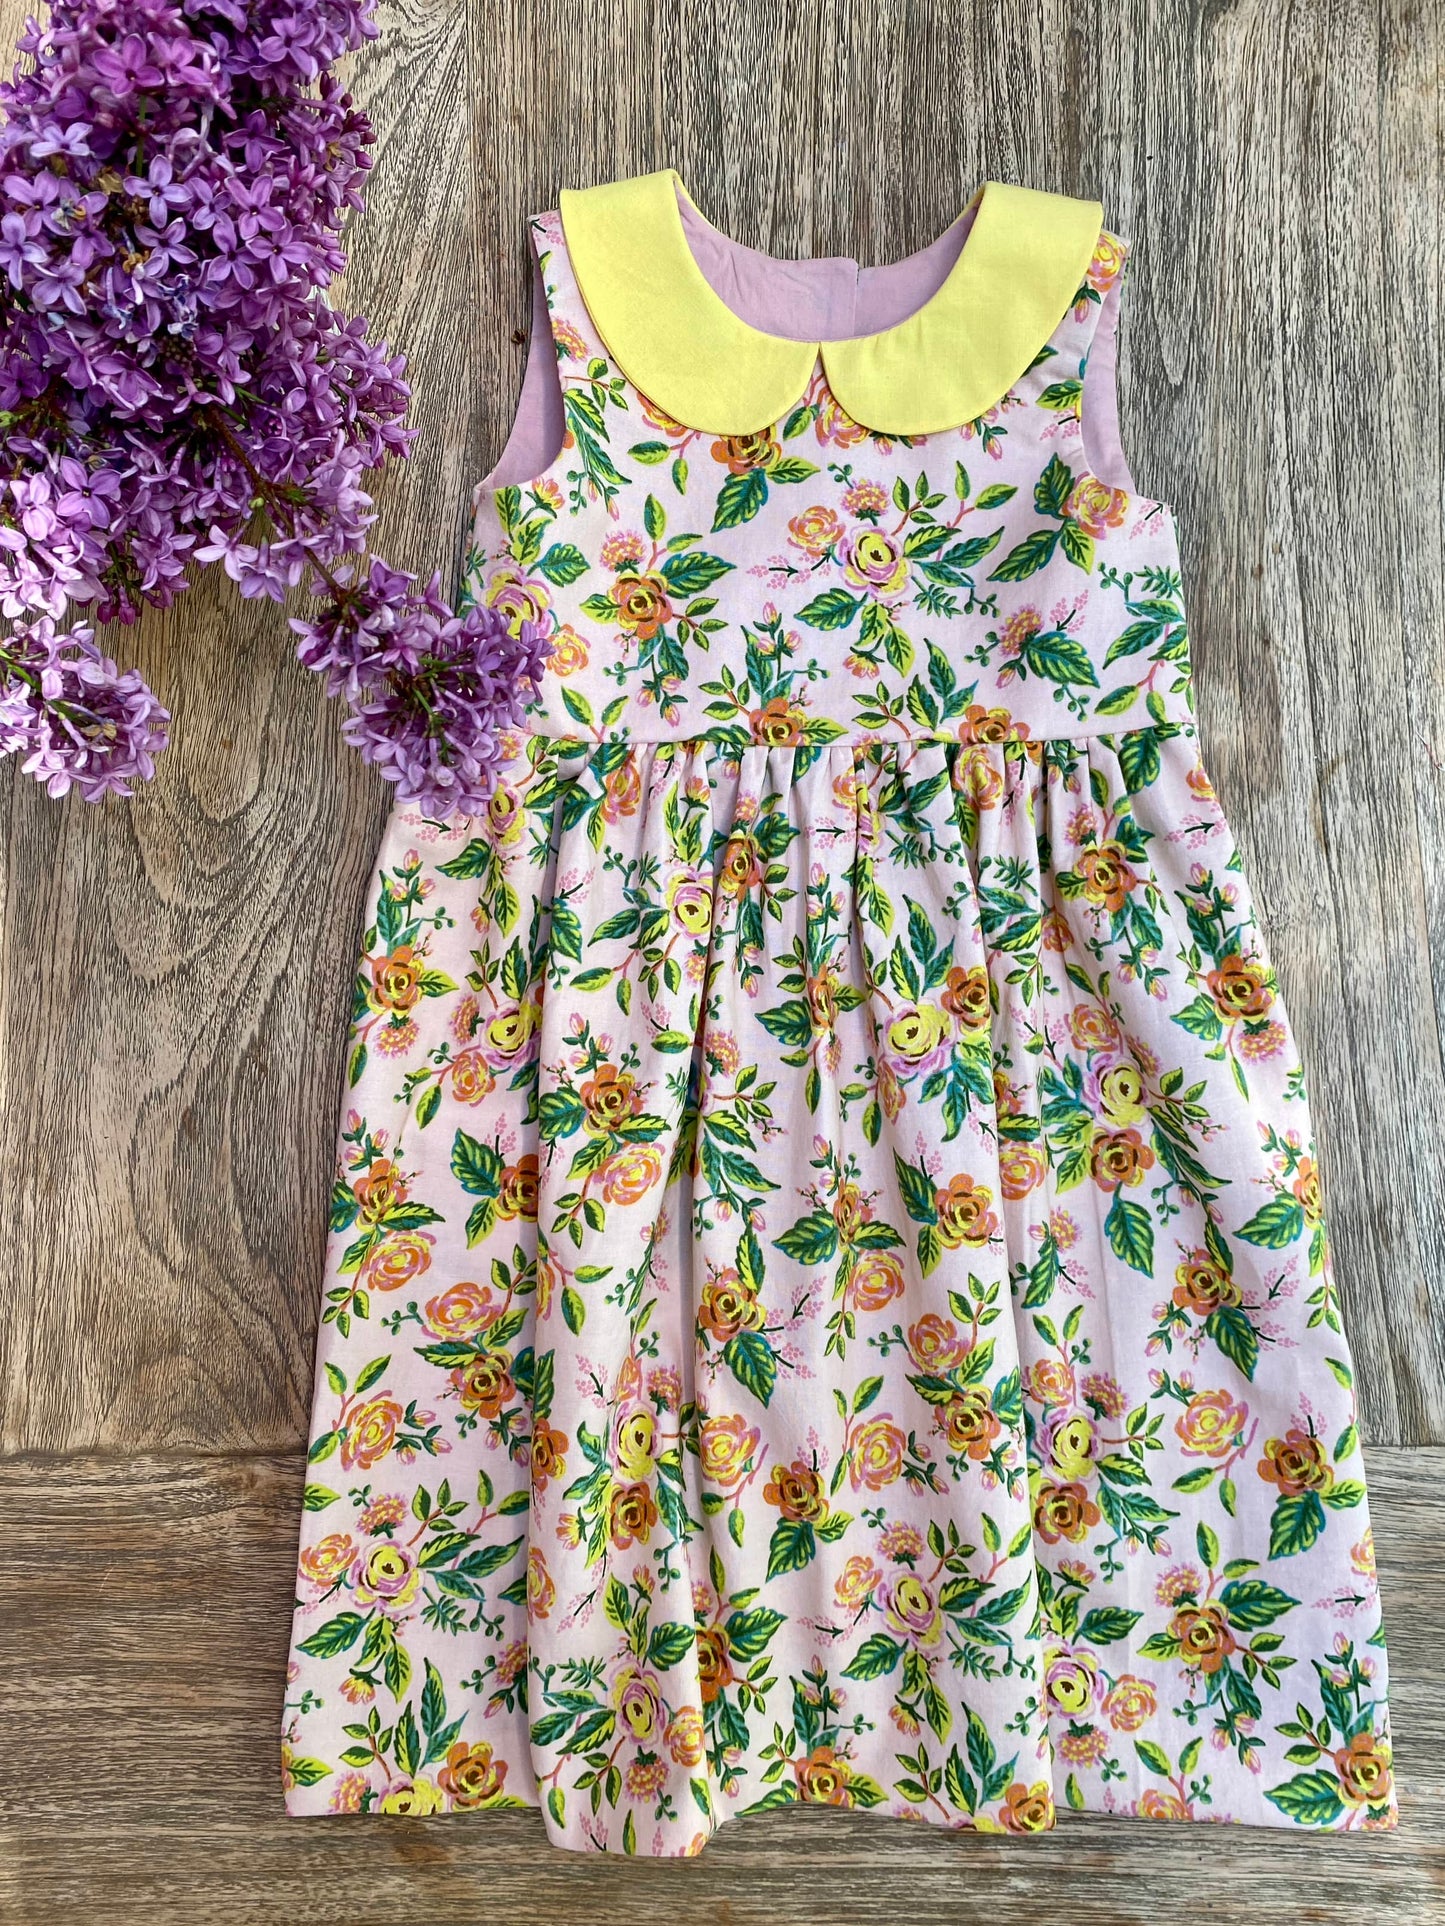 Pink Floral Dress with Yellow Peter Pan Collar (SAMPLE) Size 4t